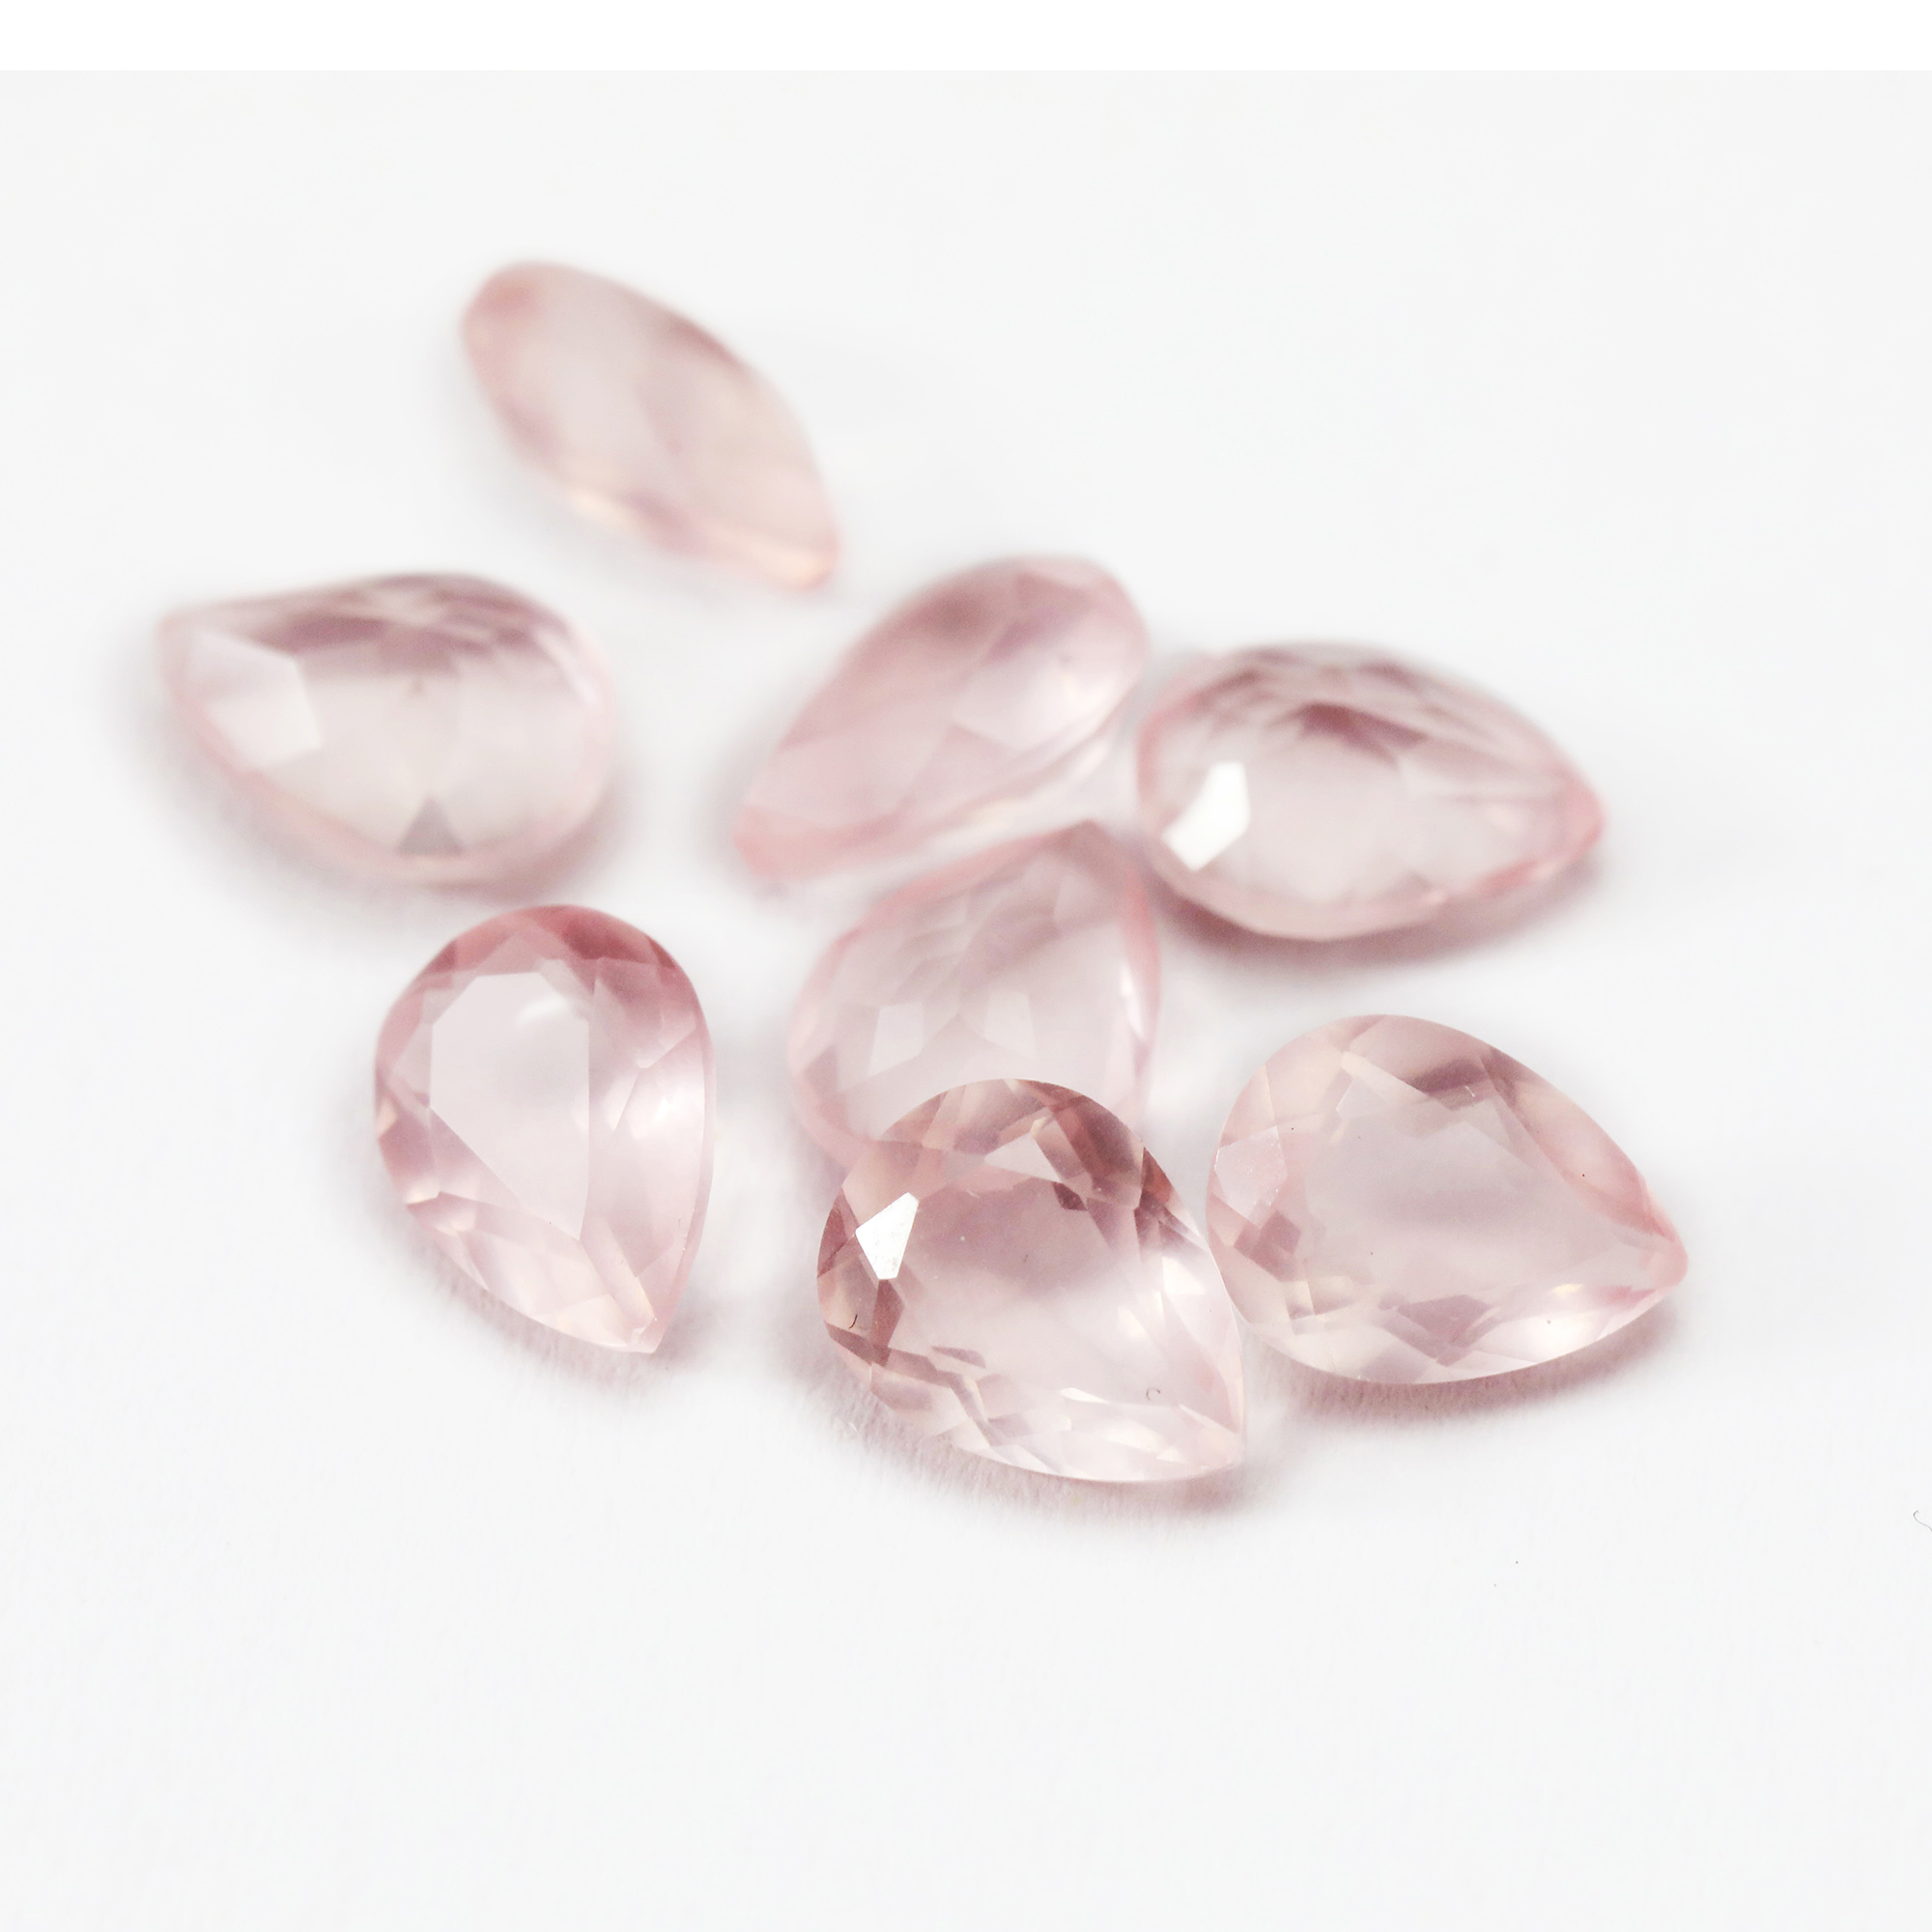 6x8MM Pear Faceted Natural Rose Quartz Pink Loose Gemstone Semi Precious Raw Stone for DIY Jewelry 4150021 - Click Image to Close